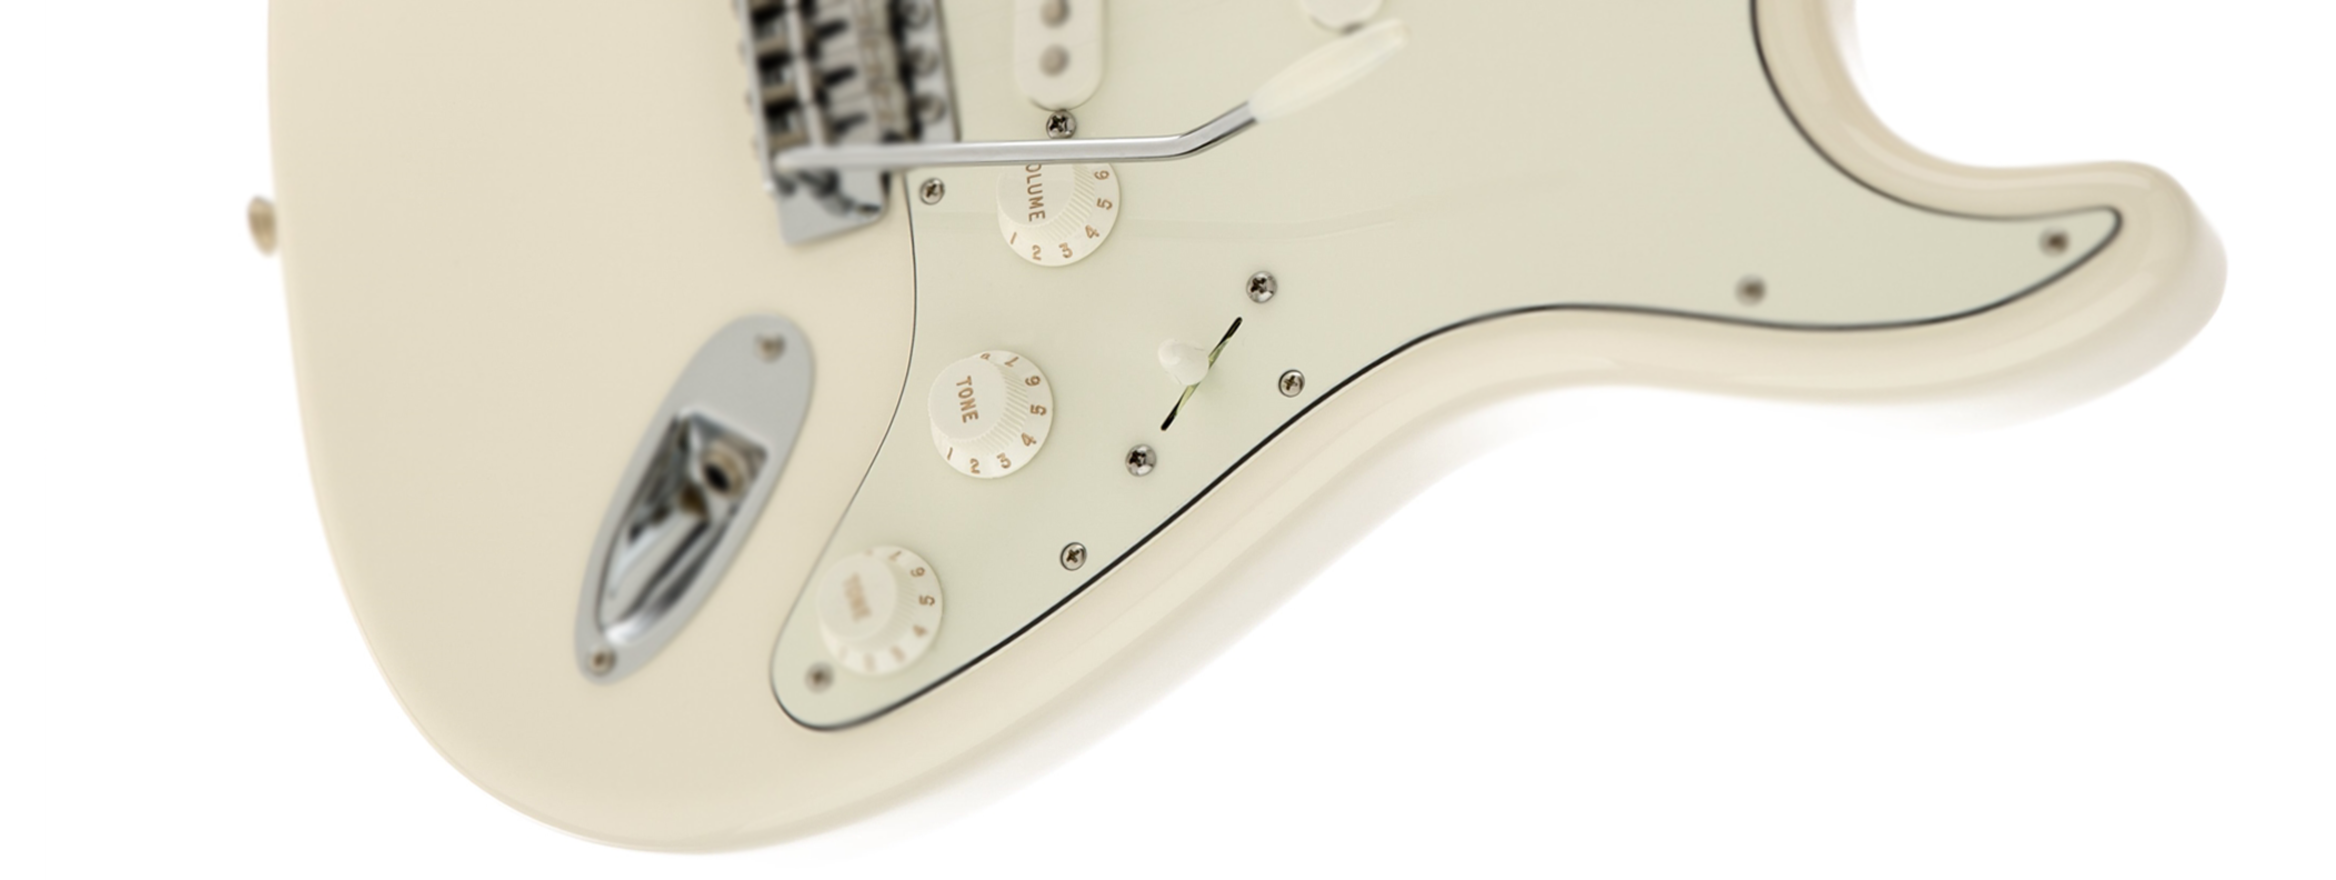 Stratocaster-inarticle